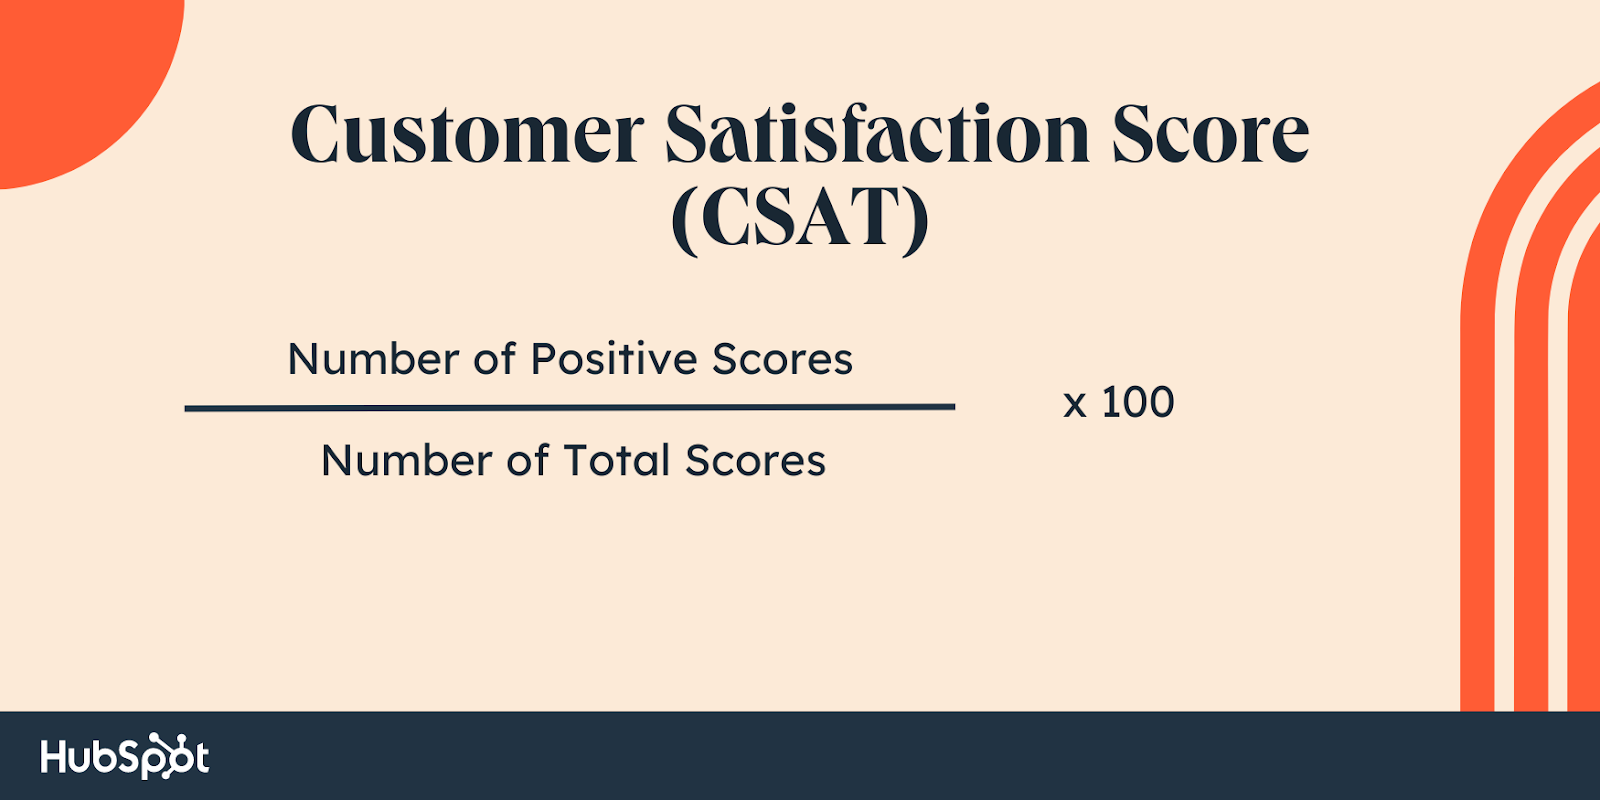 Your organization’s Customer Satisfaction Score, or CSAT, is a critical metric.